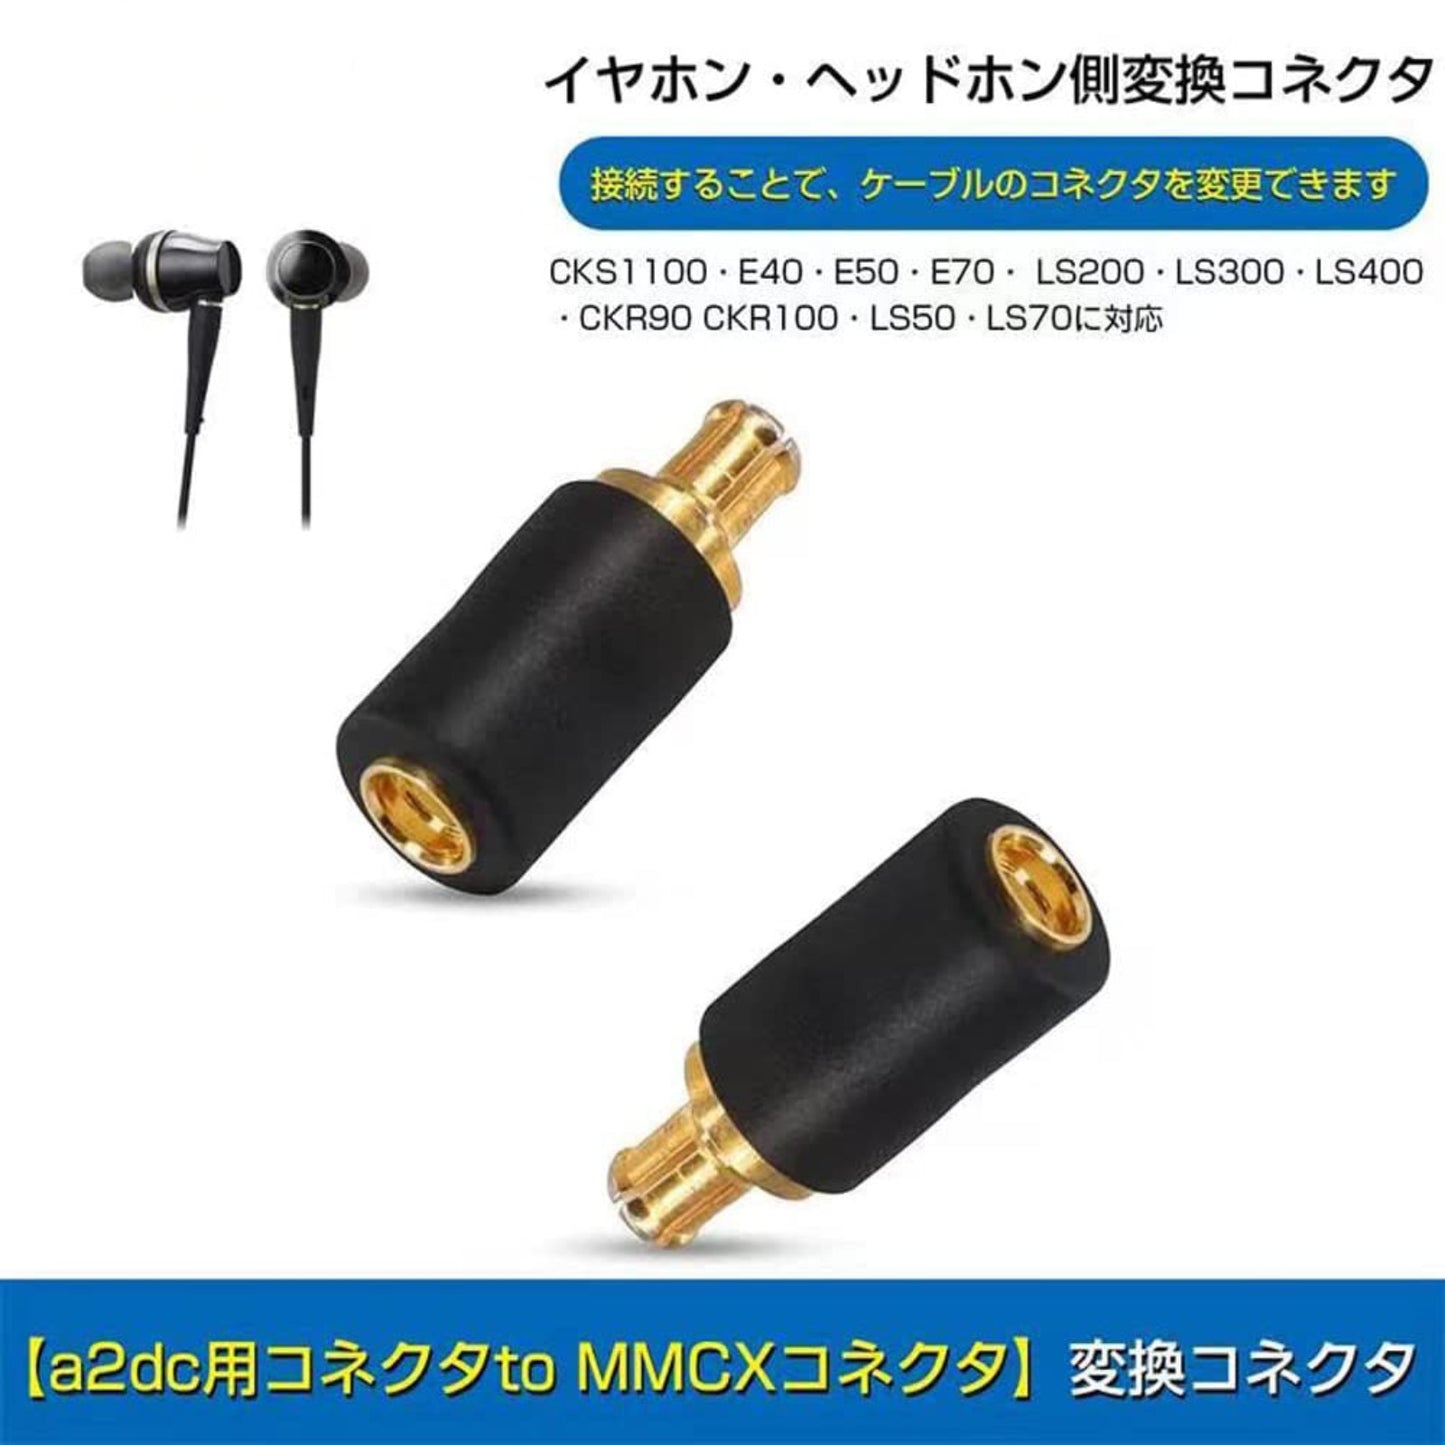 cooyin A2DC-MMCX 変換コネクター コネクターキット オーディオテクニカ用 A2DCコネクタ（オス） to MMCXコネクタ（メス） ATH-CKS1100・ATH-CKR100・ATH-CKR90など適合 2個セット